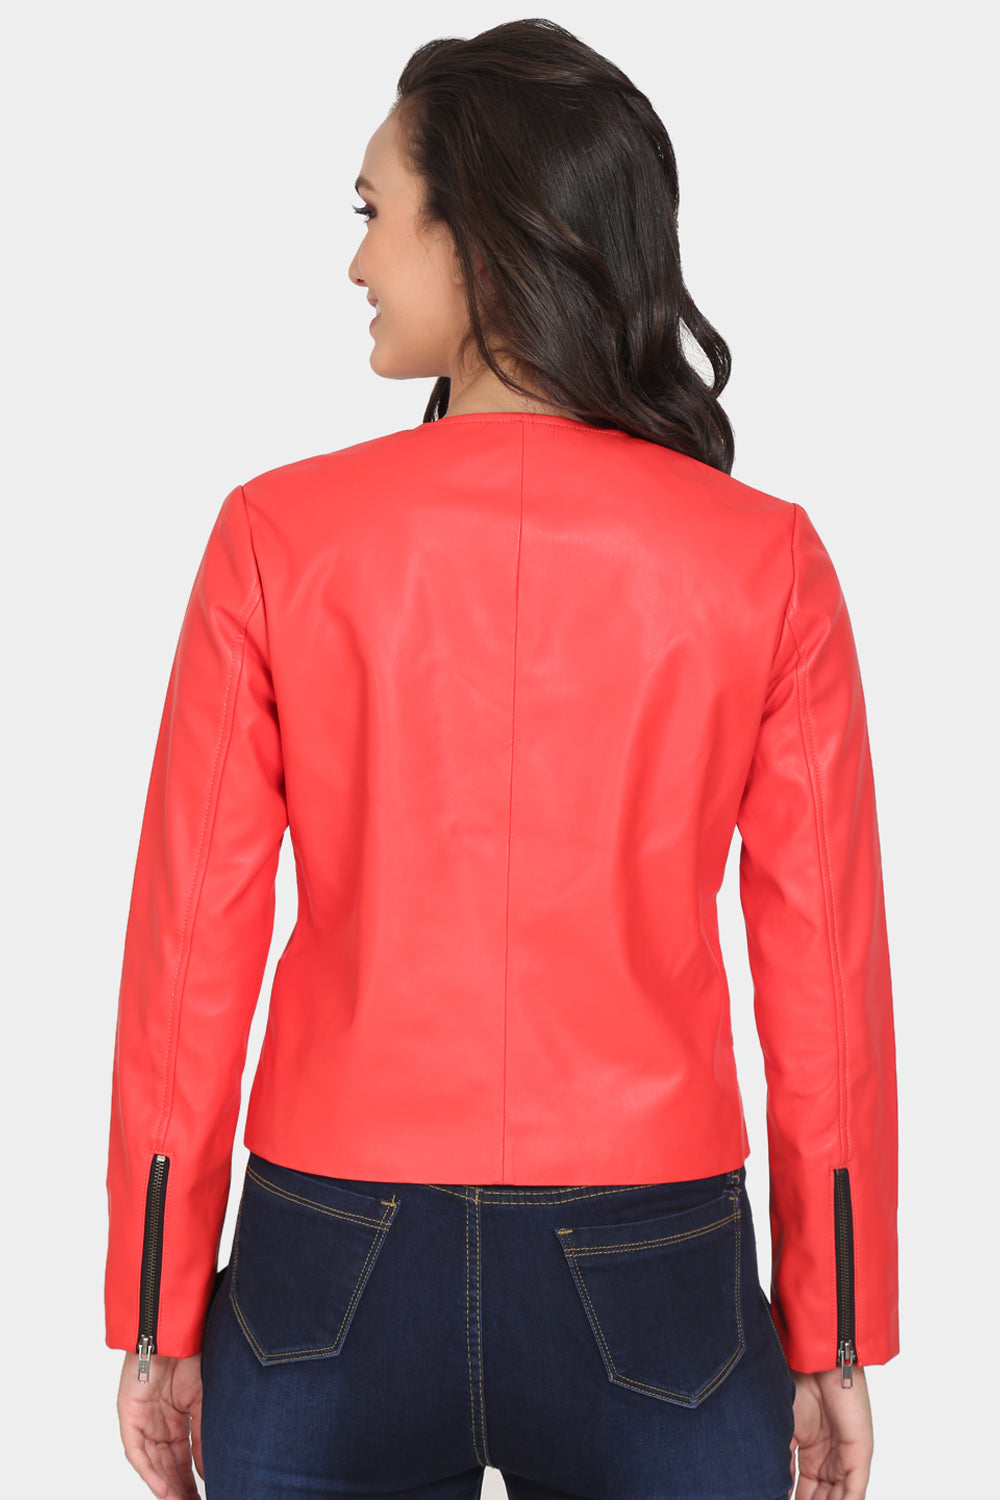 Justanned Crimson Red Leather Jacket